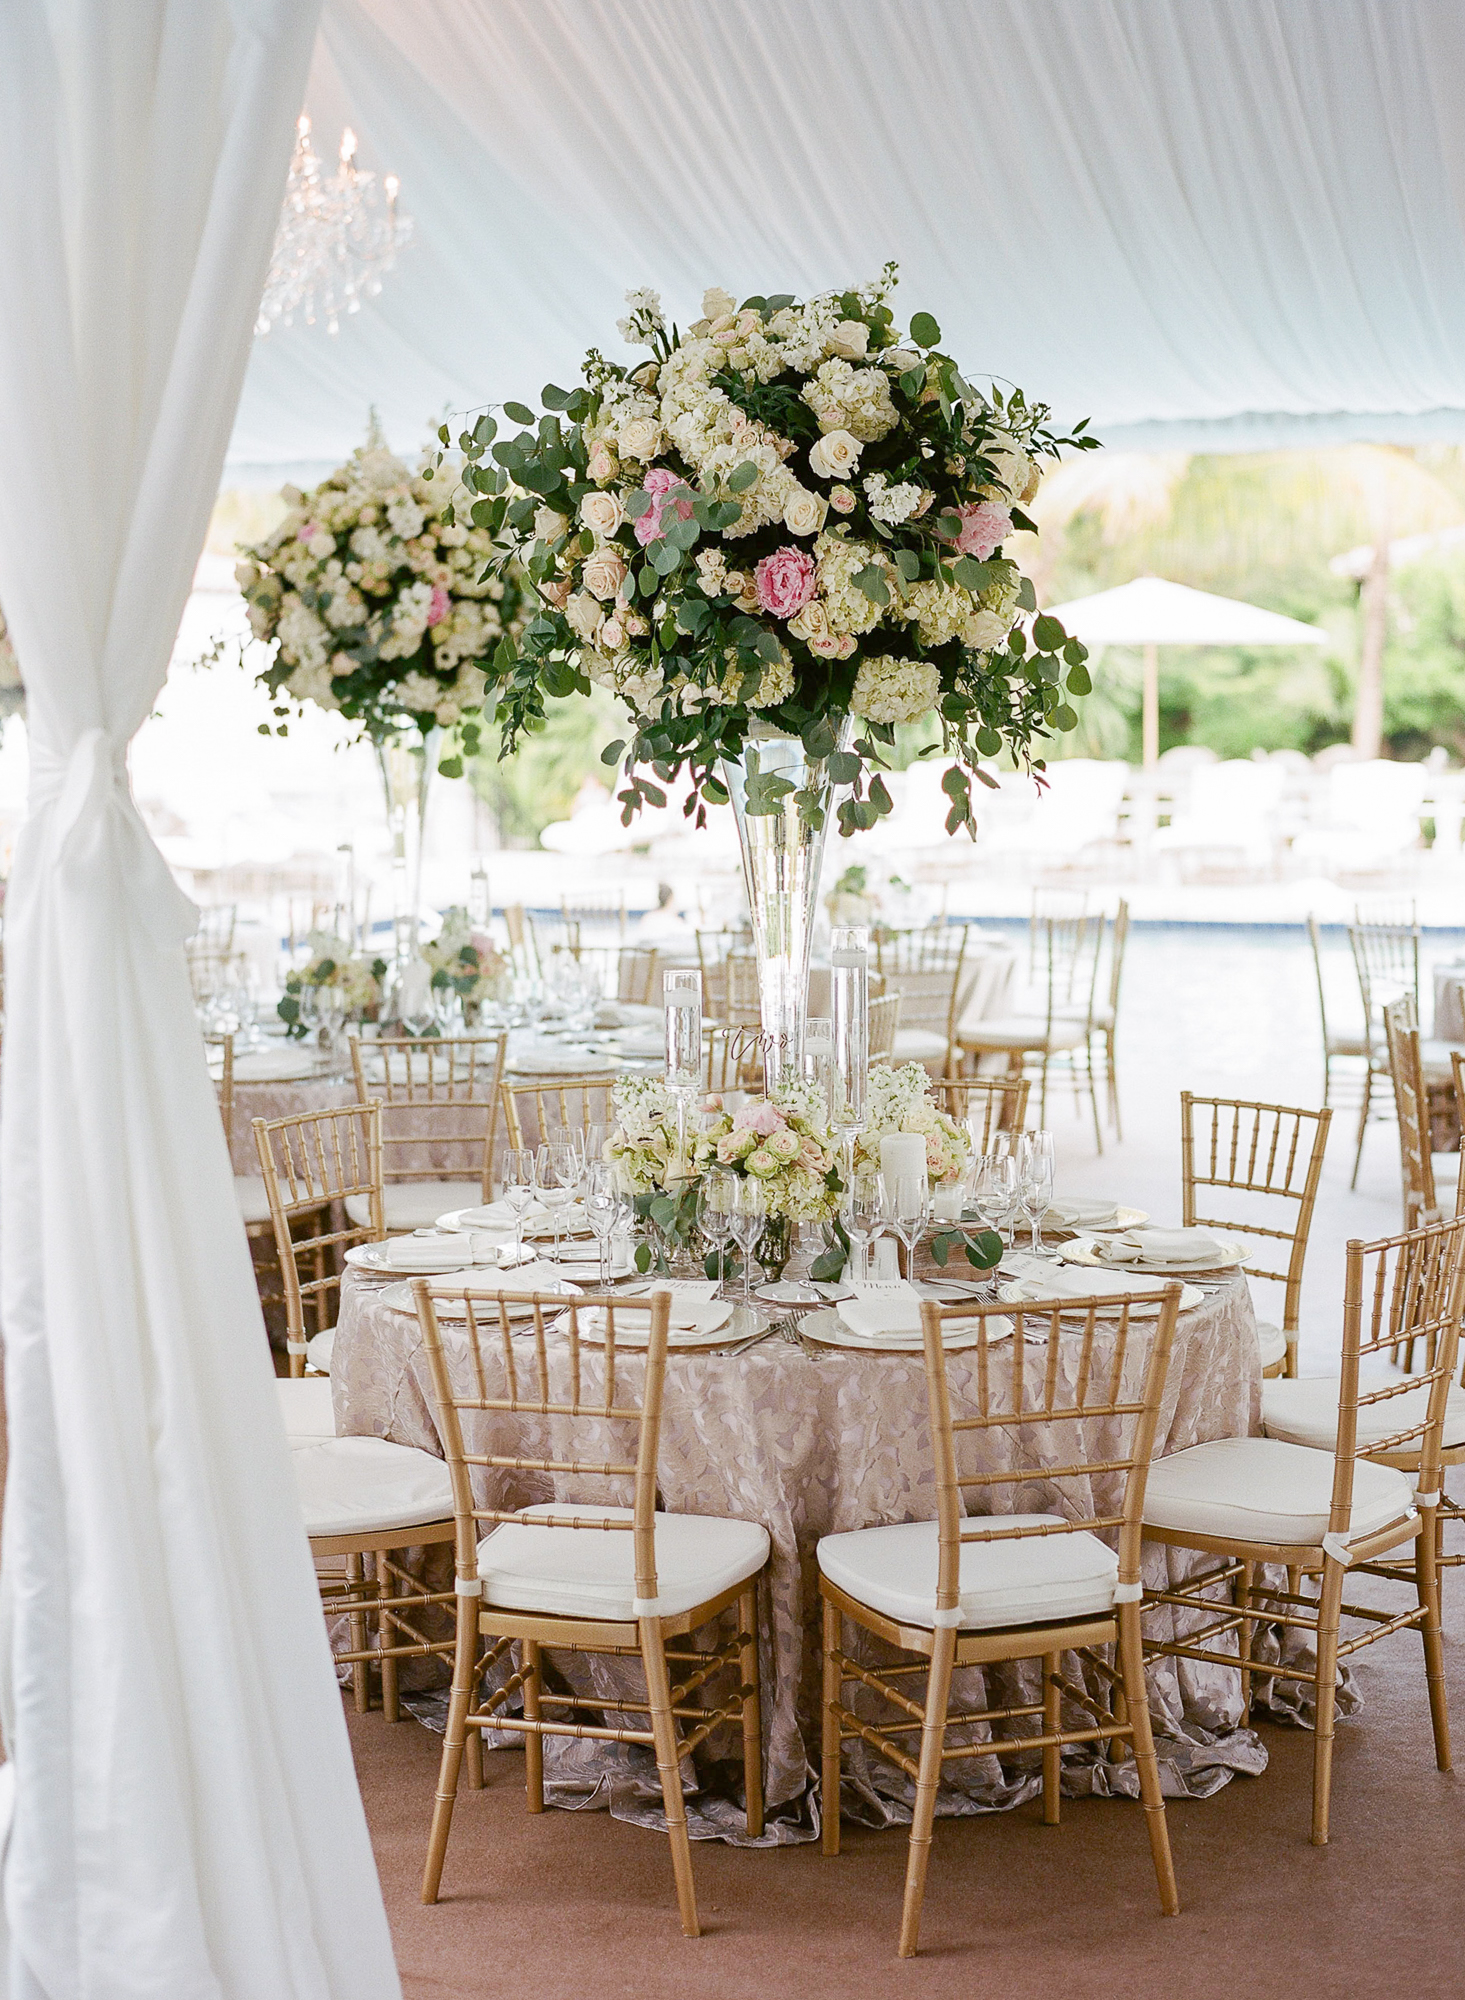 The fisher island club terrace was carpeted and featured a mix of long royal tables and round guest tables. The centerpieces used eucalyptus and wood boxes for a very French feel. Glass vases added a clean and modern touch | fisher island club, fisher island wedding, south florida wedding planner, florida wedding